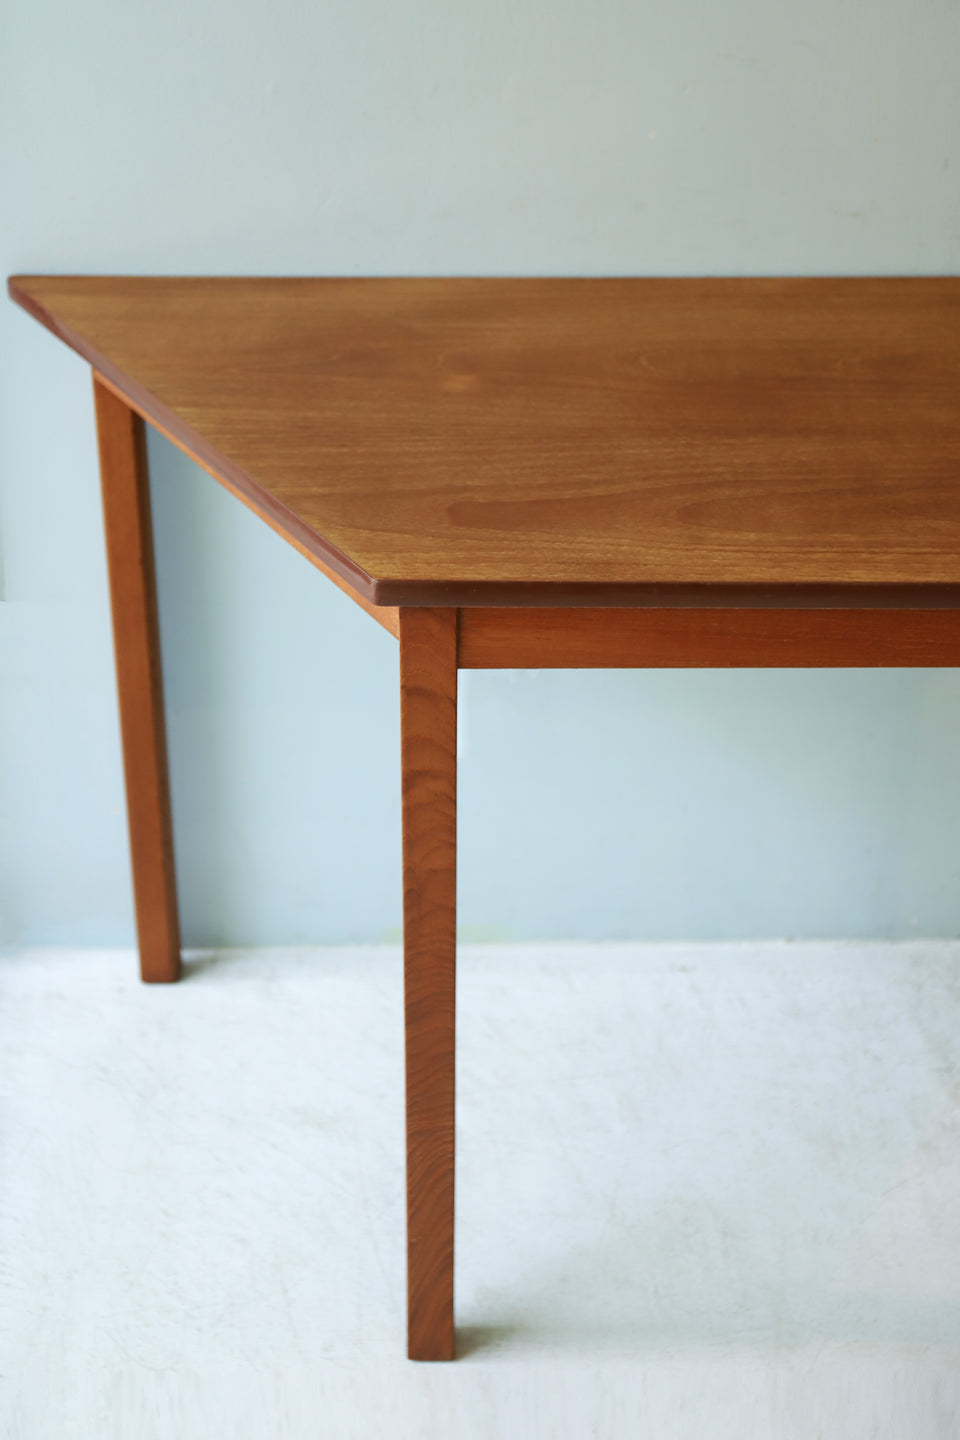 Danish Vintage Trapezoid Table/デンマークヴィンテージ テーブル 台形 チーク材 北欧家具